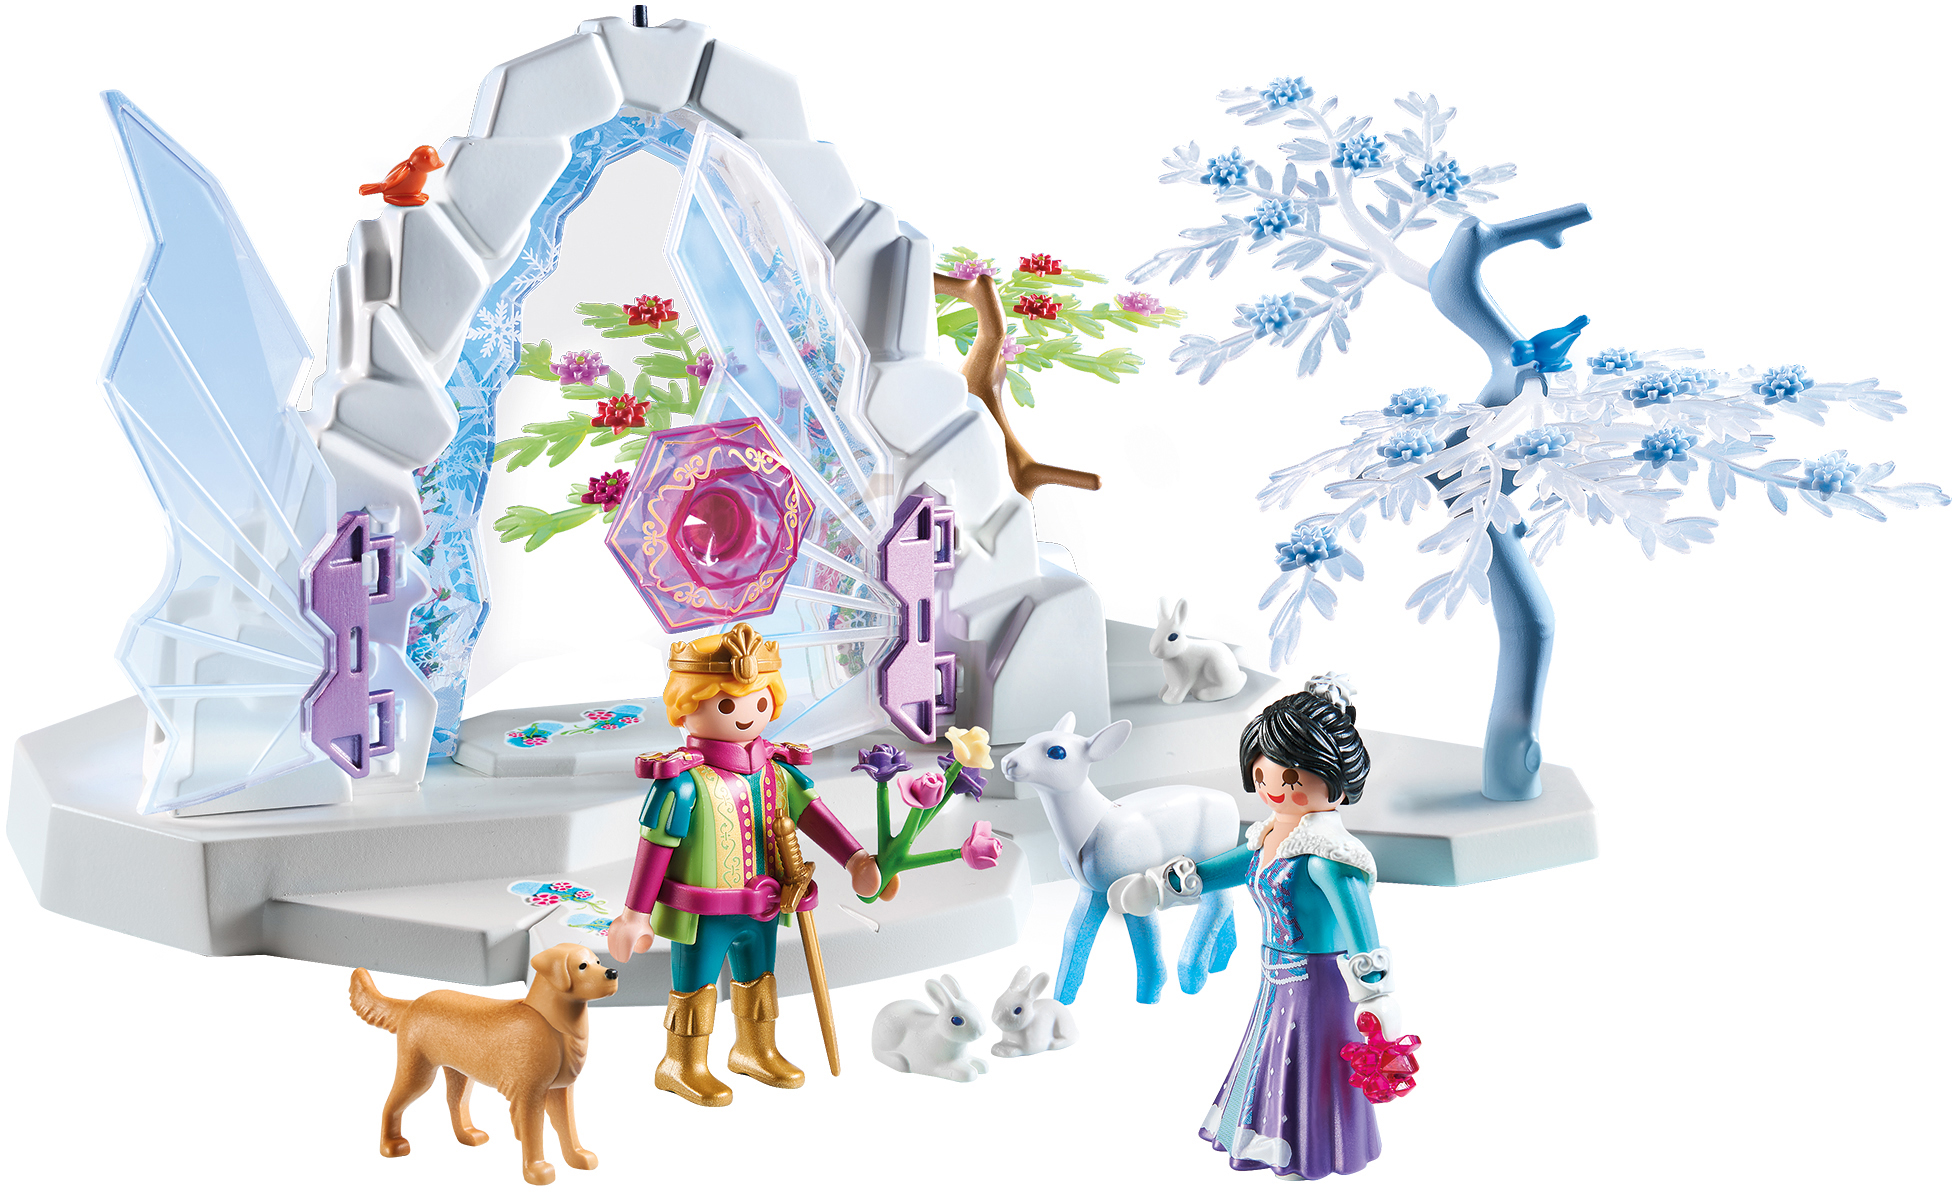 PLAYMOBIL Crystal Gate to the Winter World Doll Playset - image 2 of 6